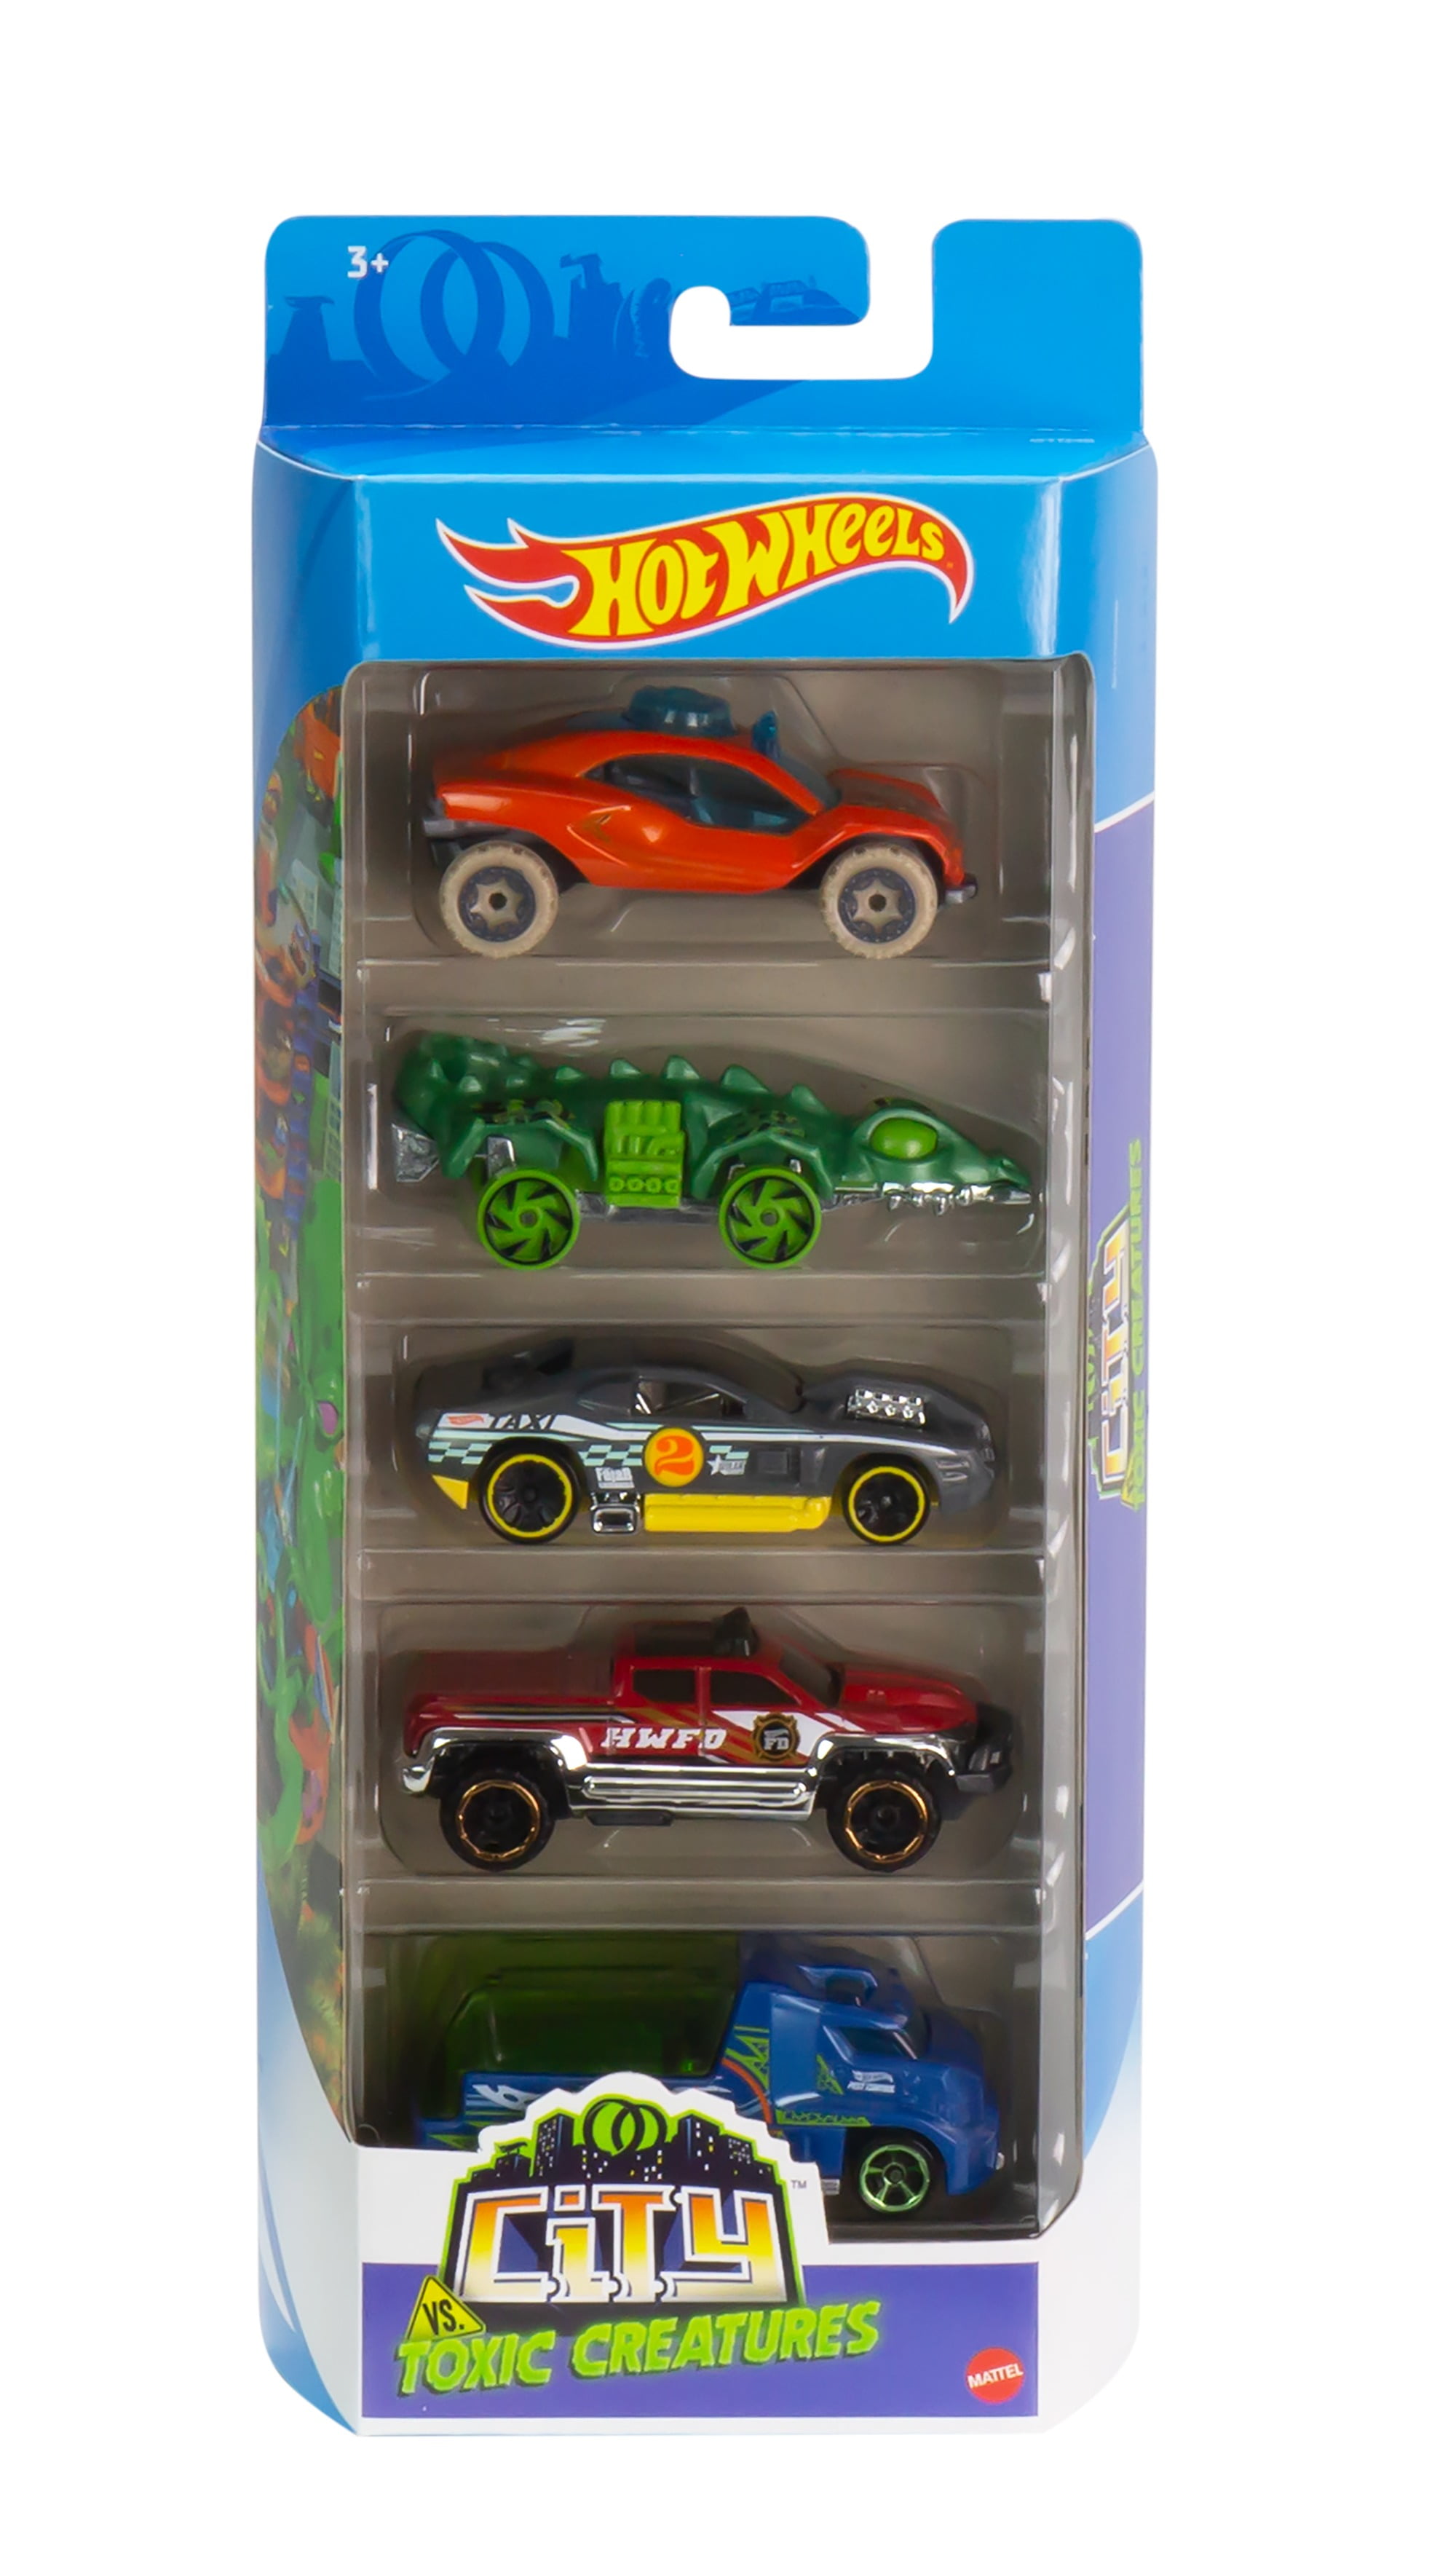 Hot Wheels 5-Car Pack of 1:64 Scale Vehicles for Kids & Collectors (Styles May Vary)